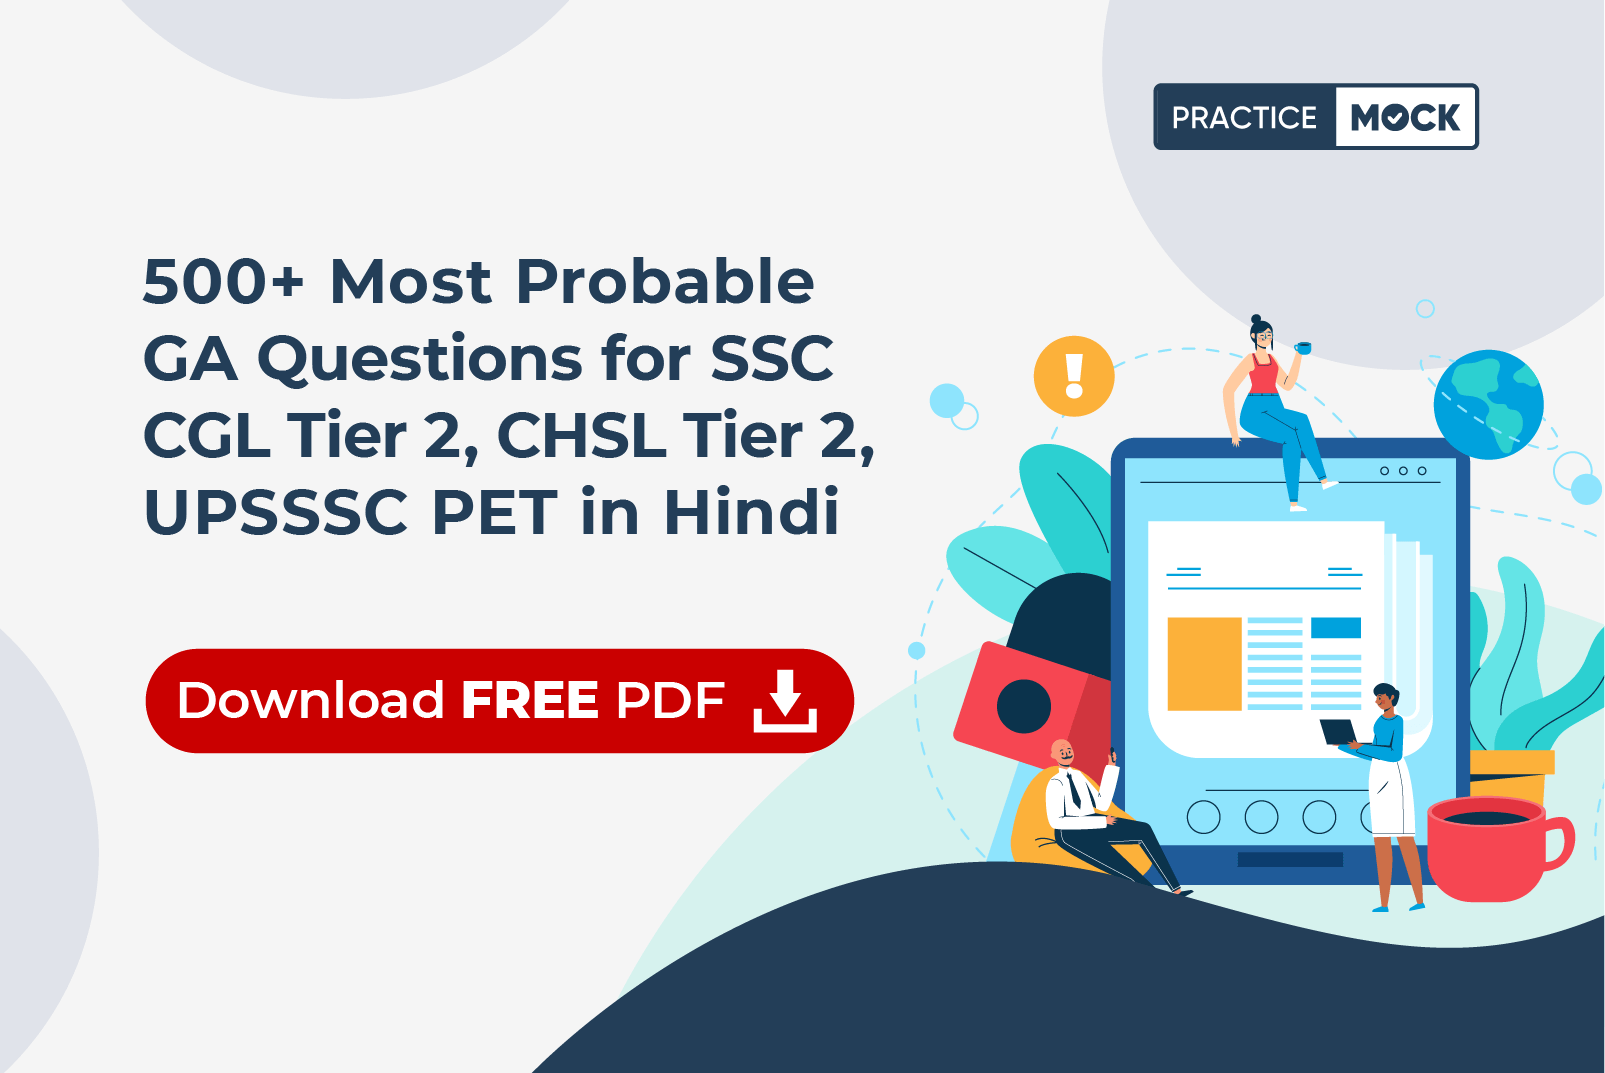 500+ Most Probable GA Questions for SSC CGL Tier II